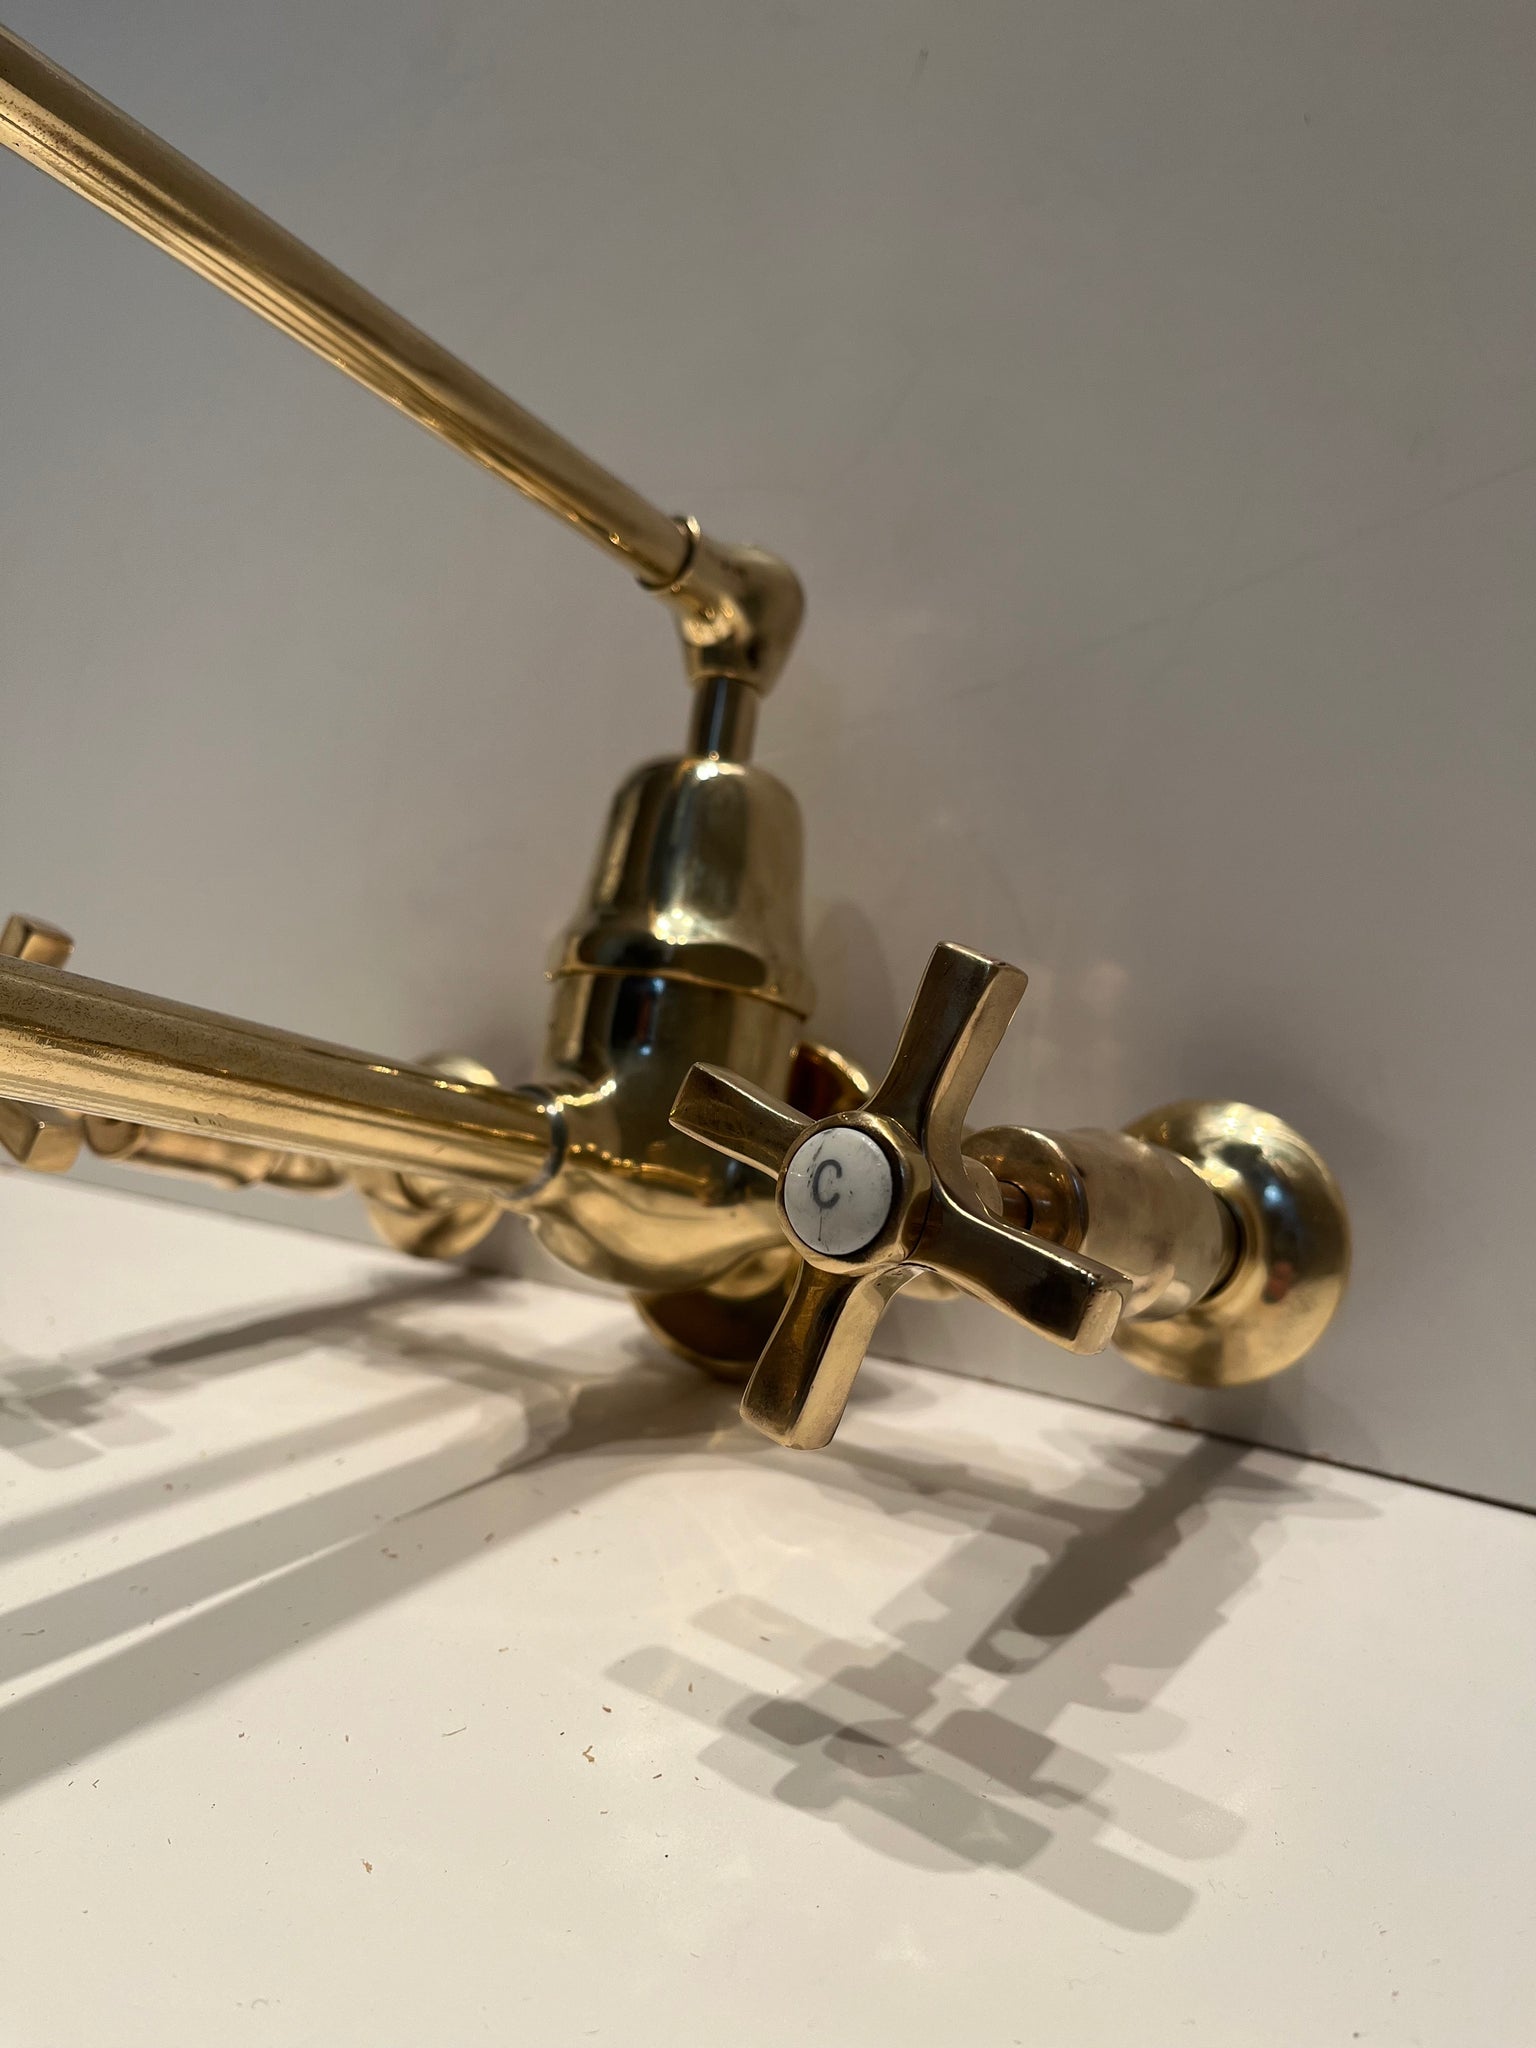 Vintage French Wall-Fixing Kitchen Mixer Tap C.1920 in Unsealed Polished Brass Finish